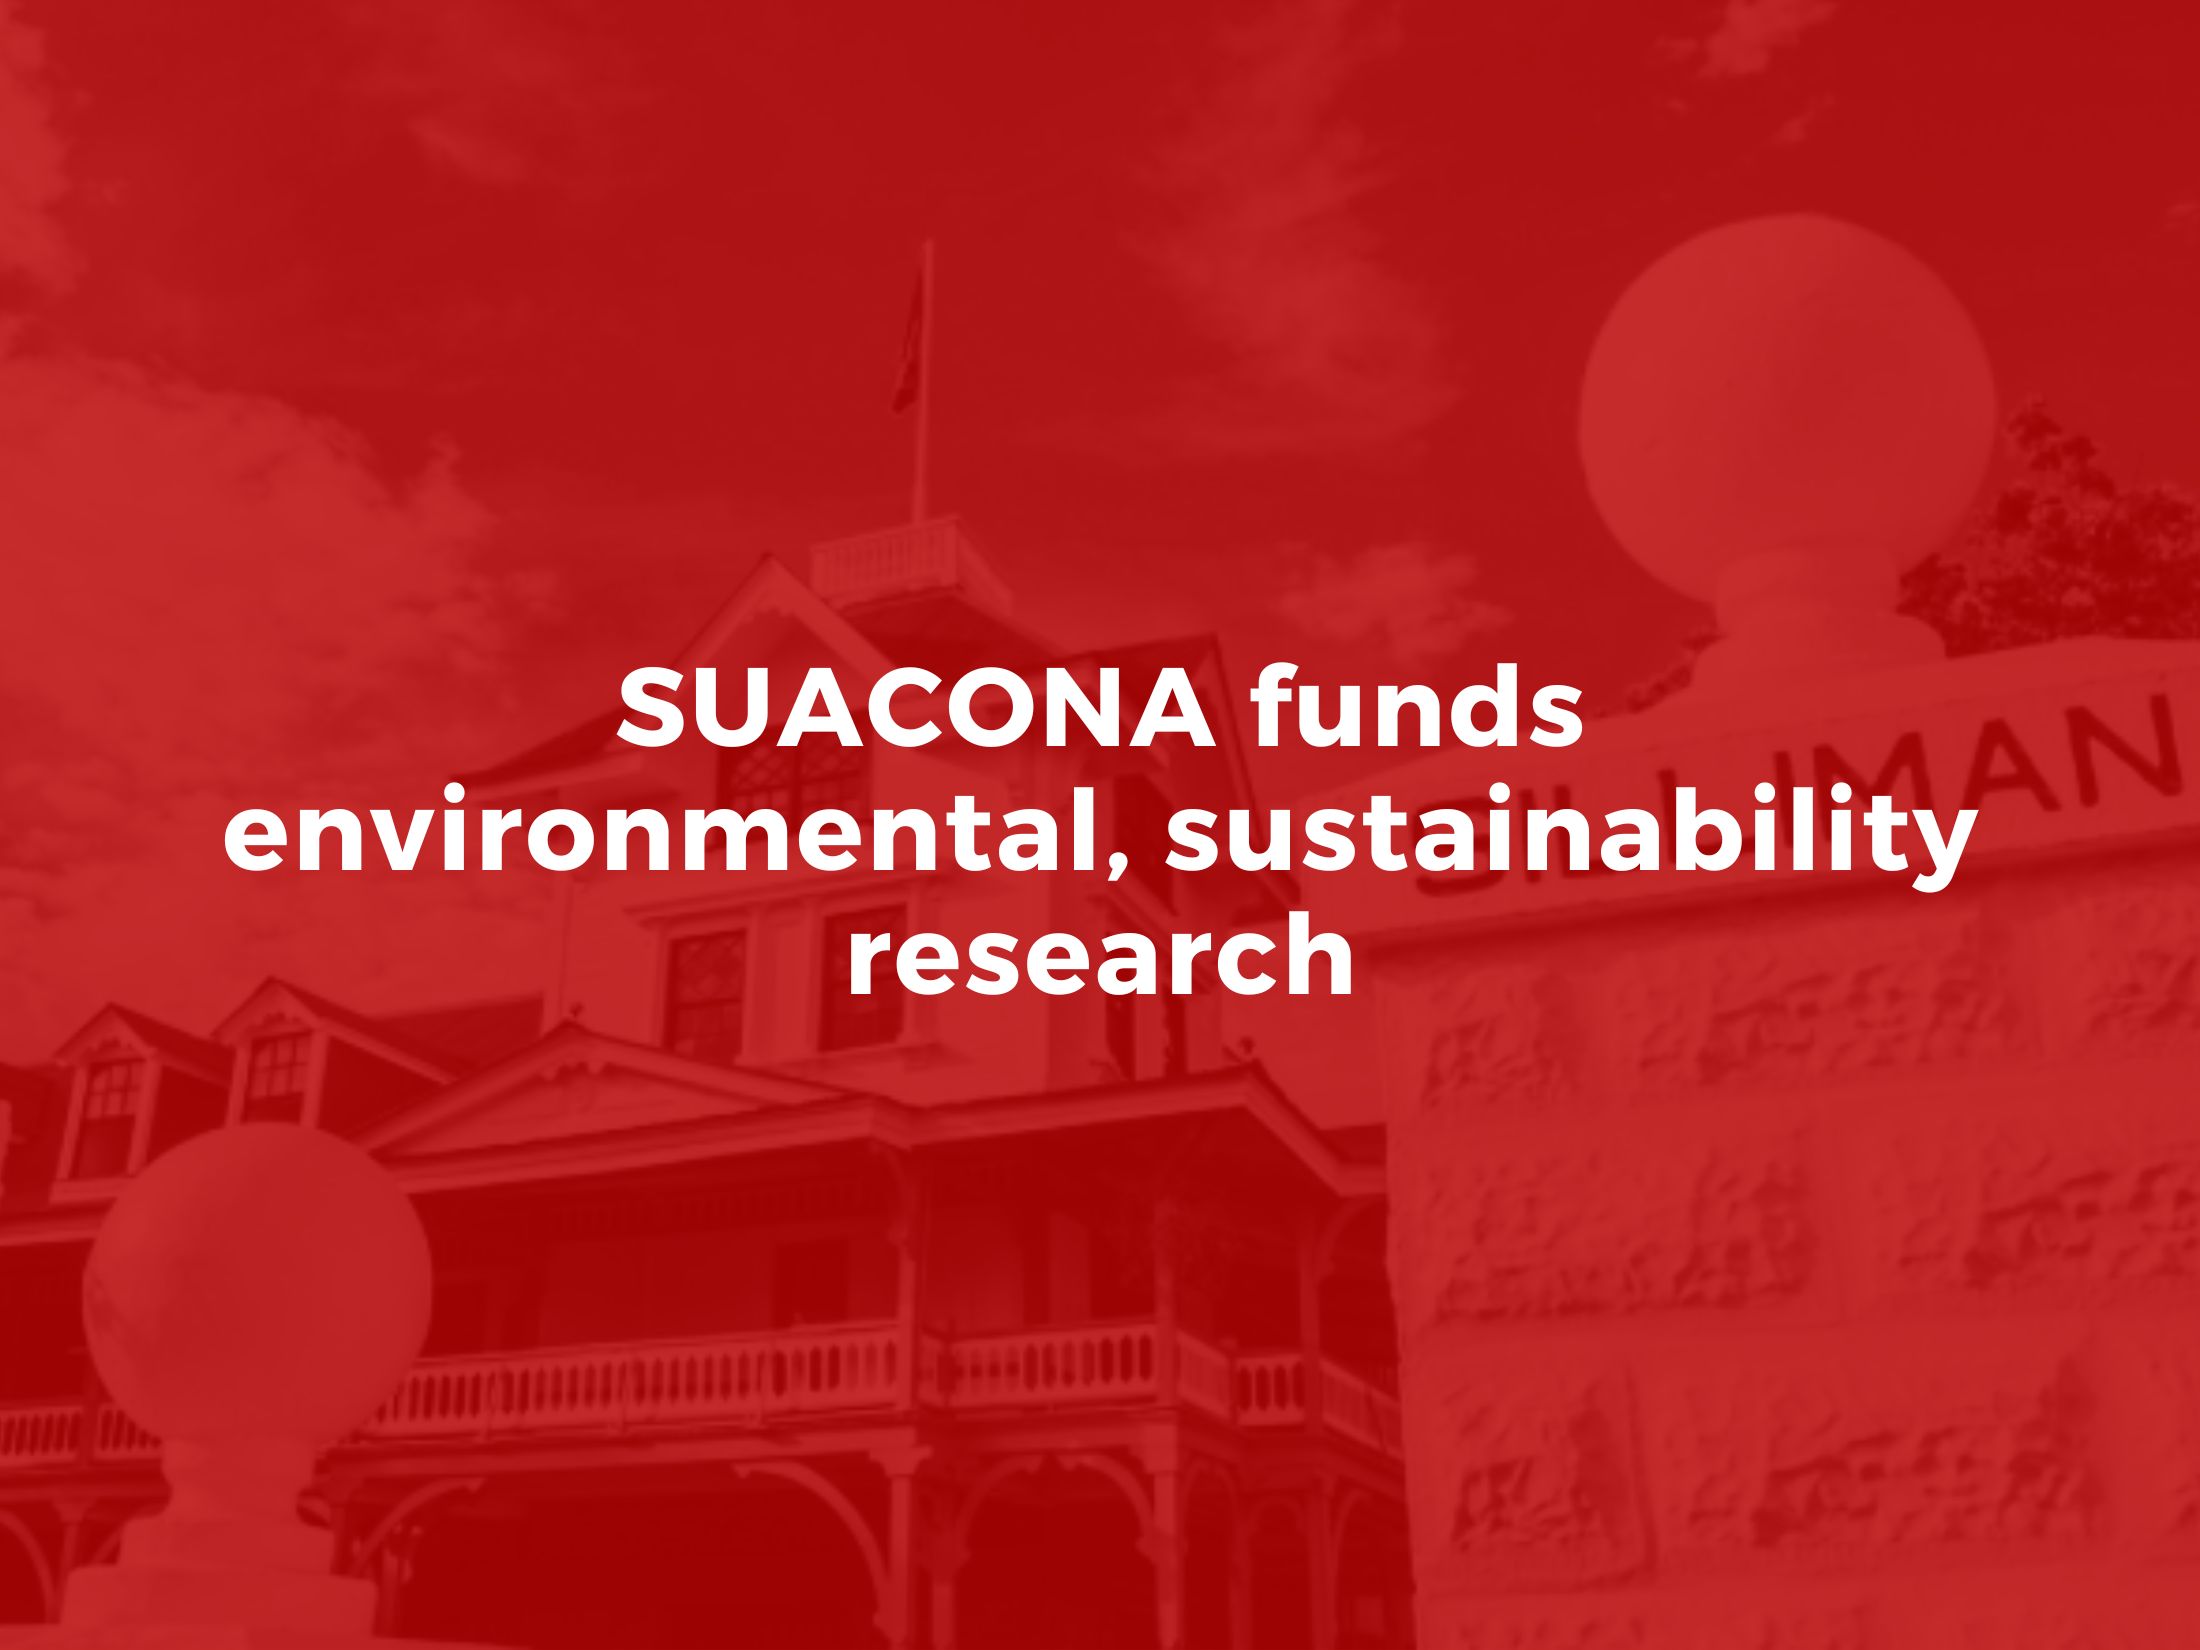 SUACONA funds environmental, sustainability research